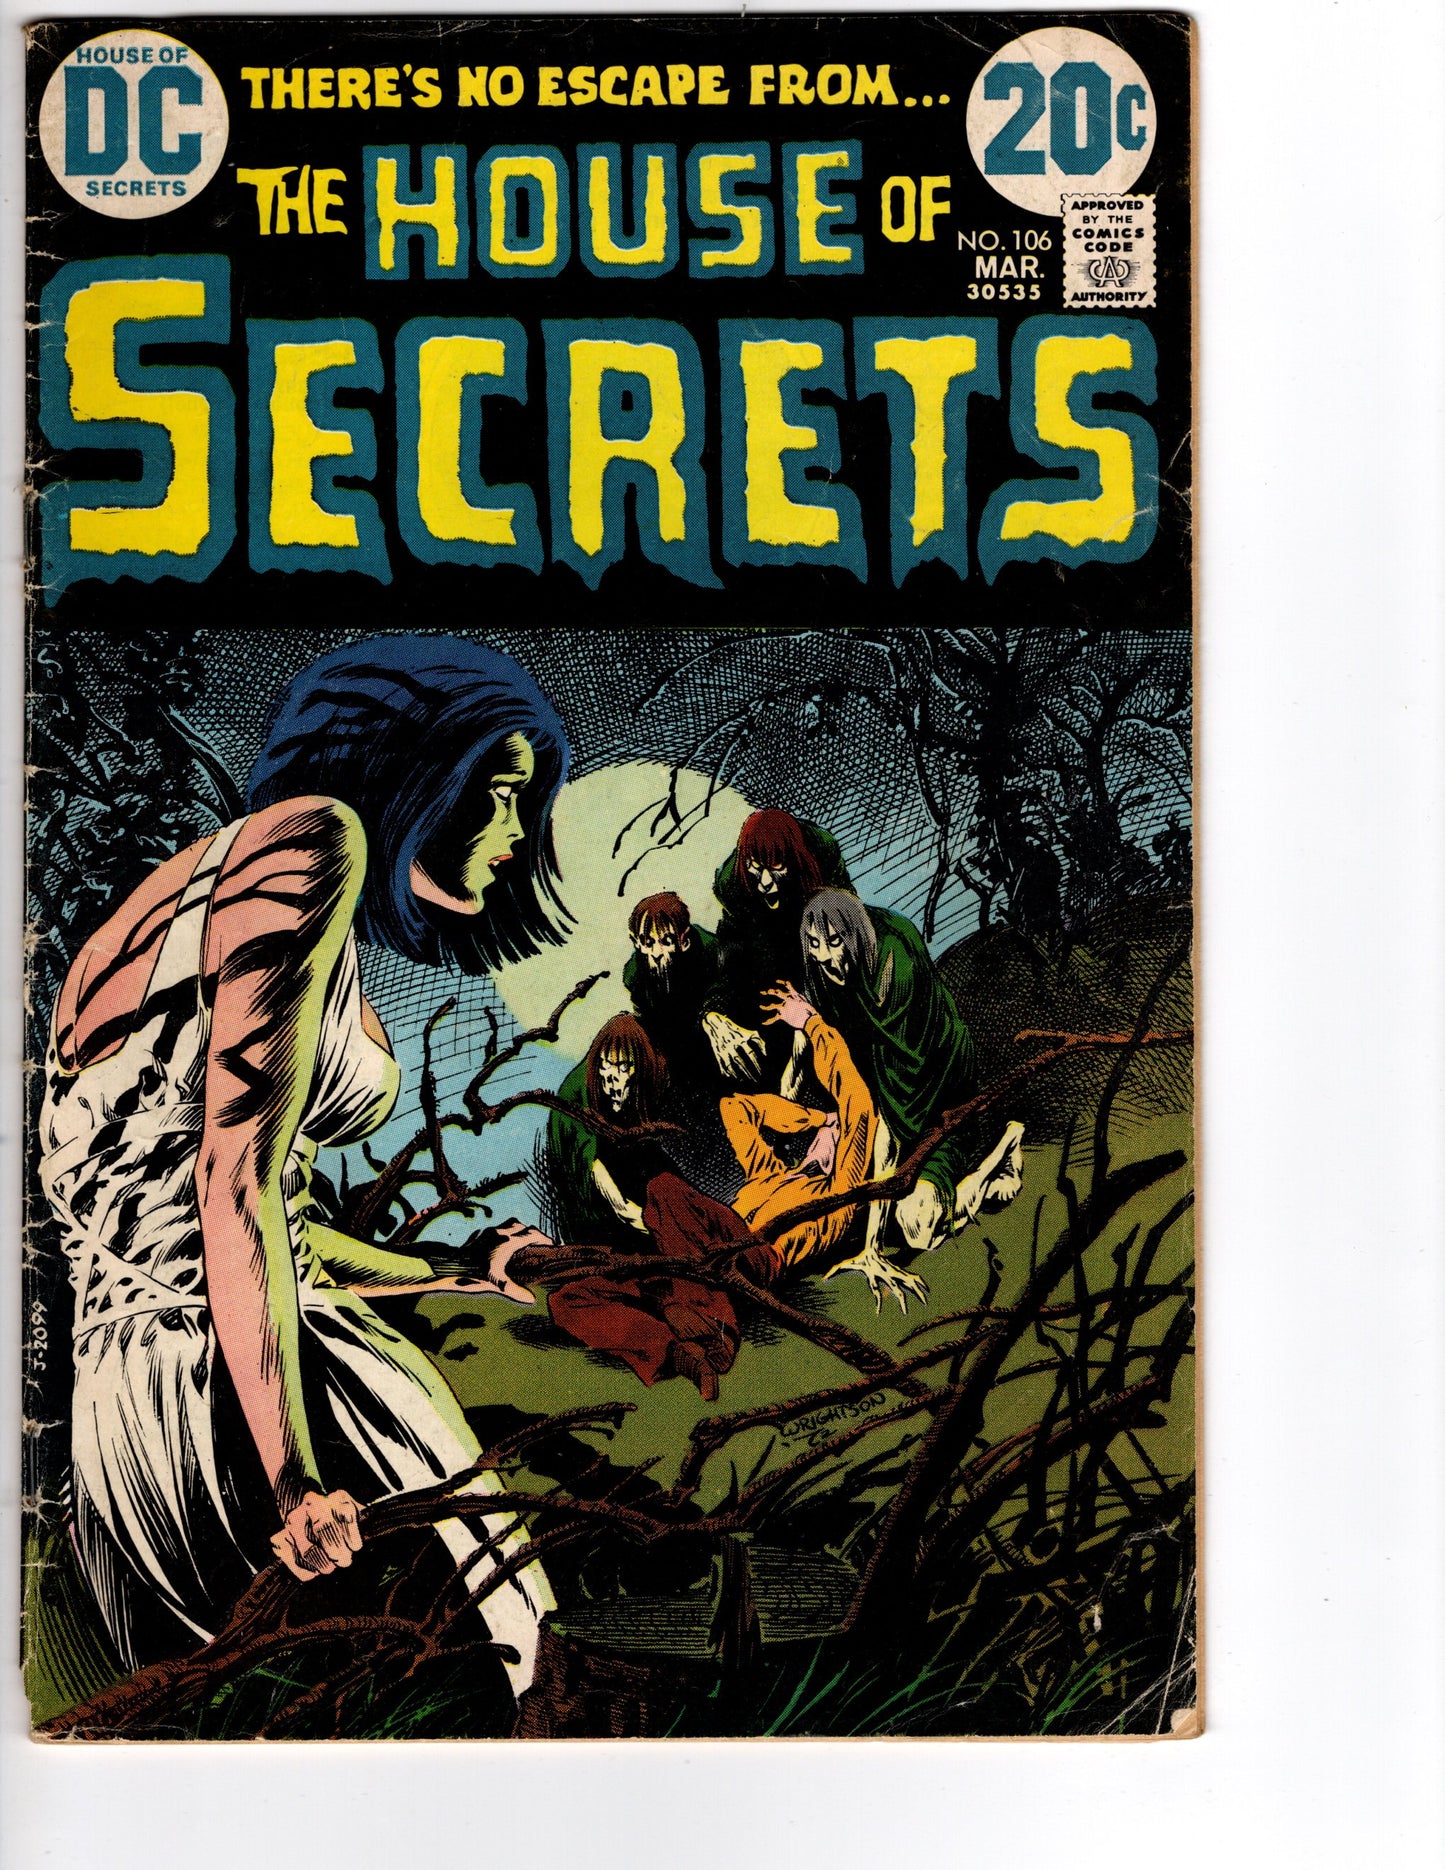 The House of Secrets #106